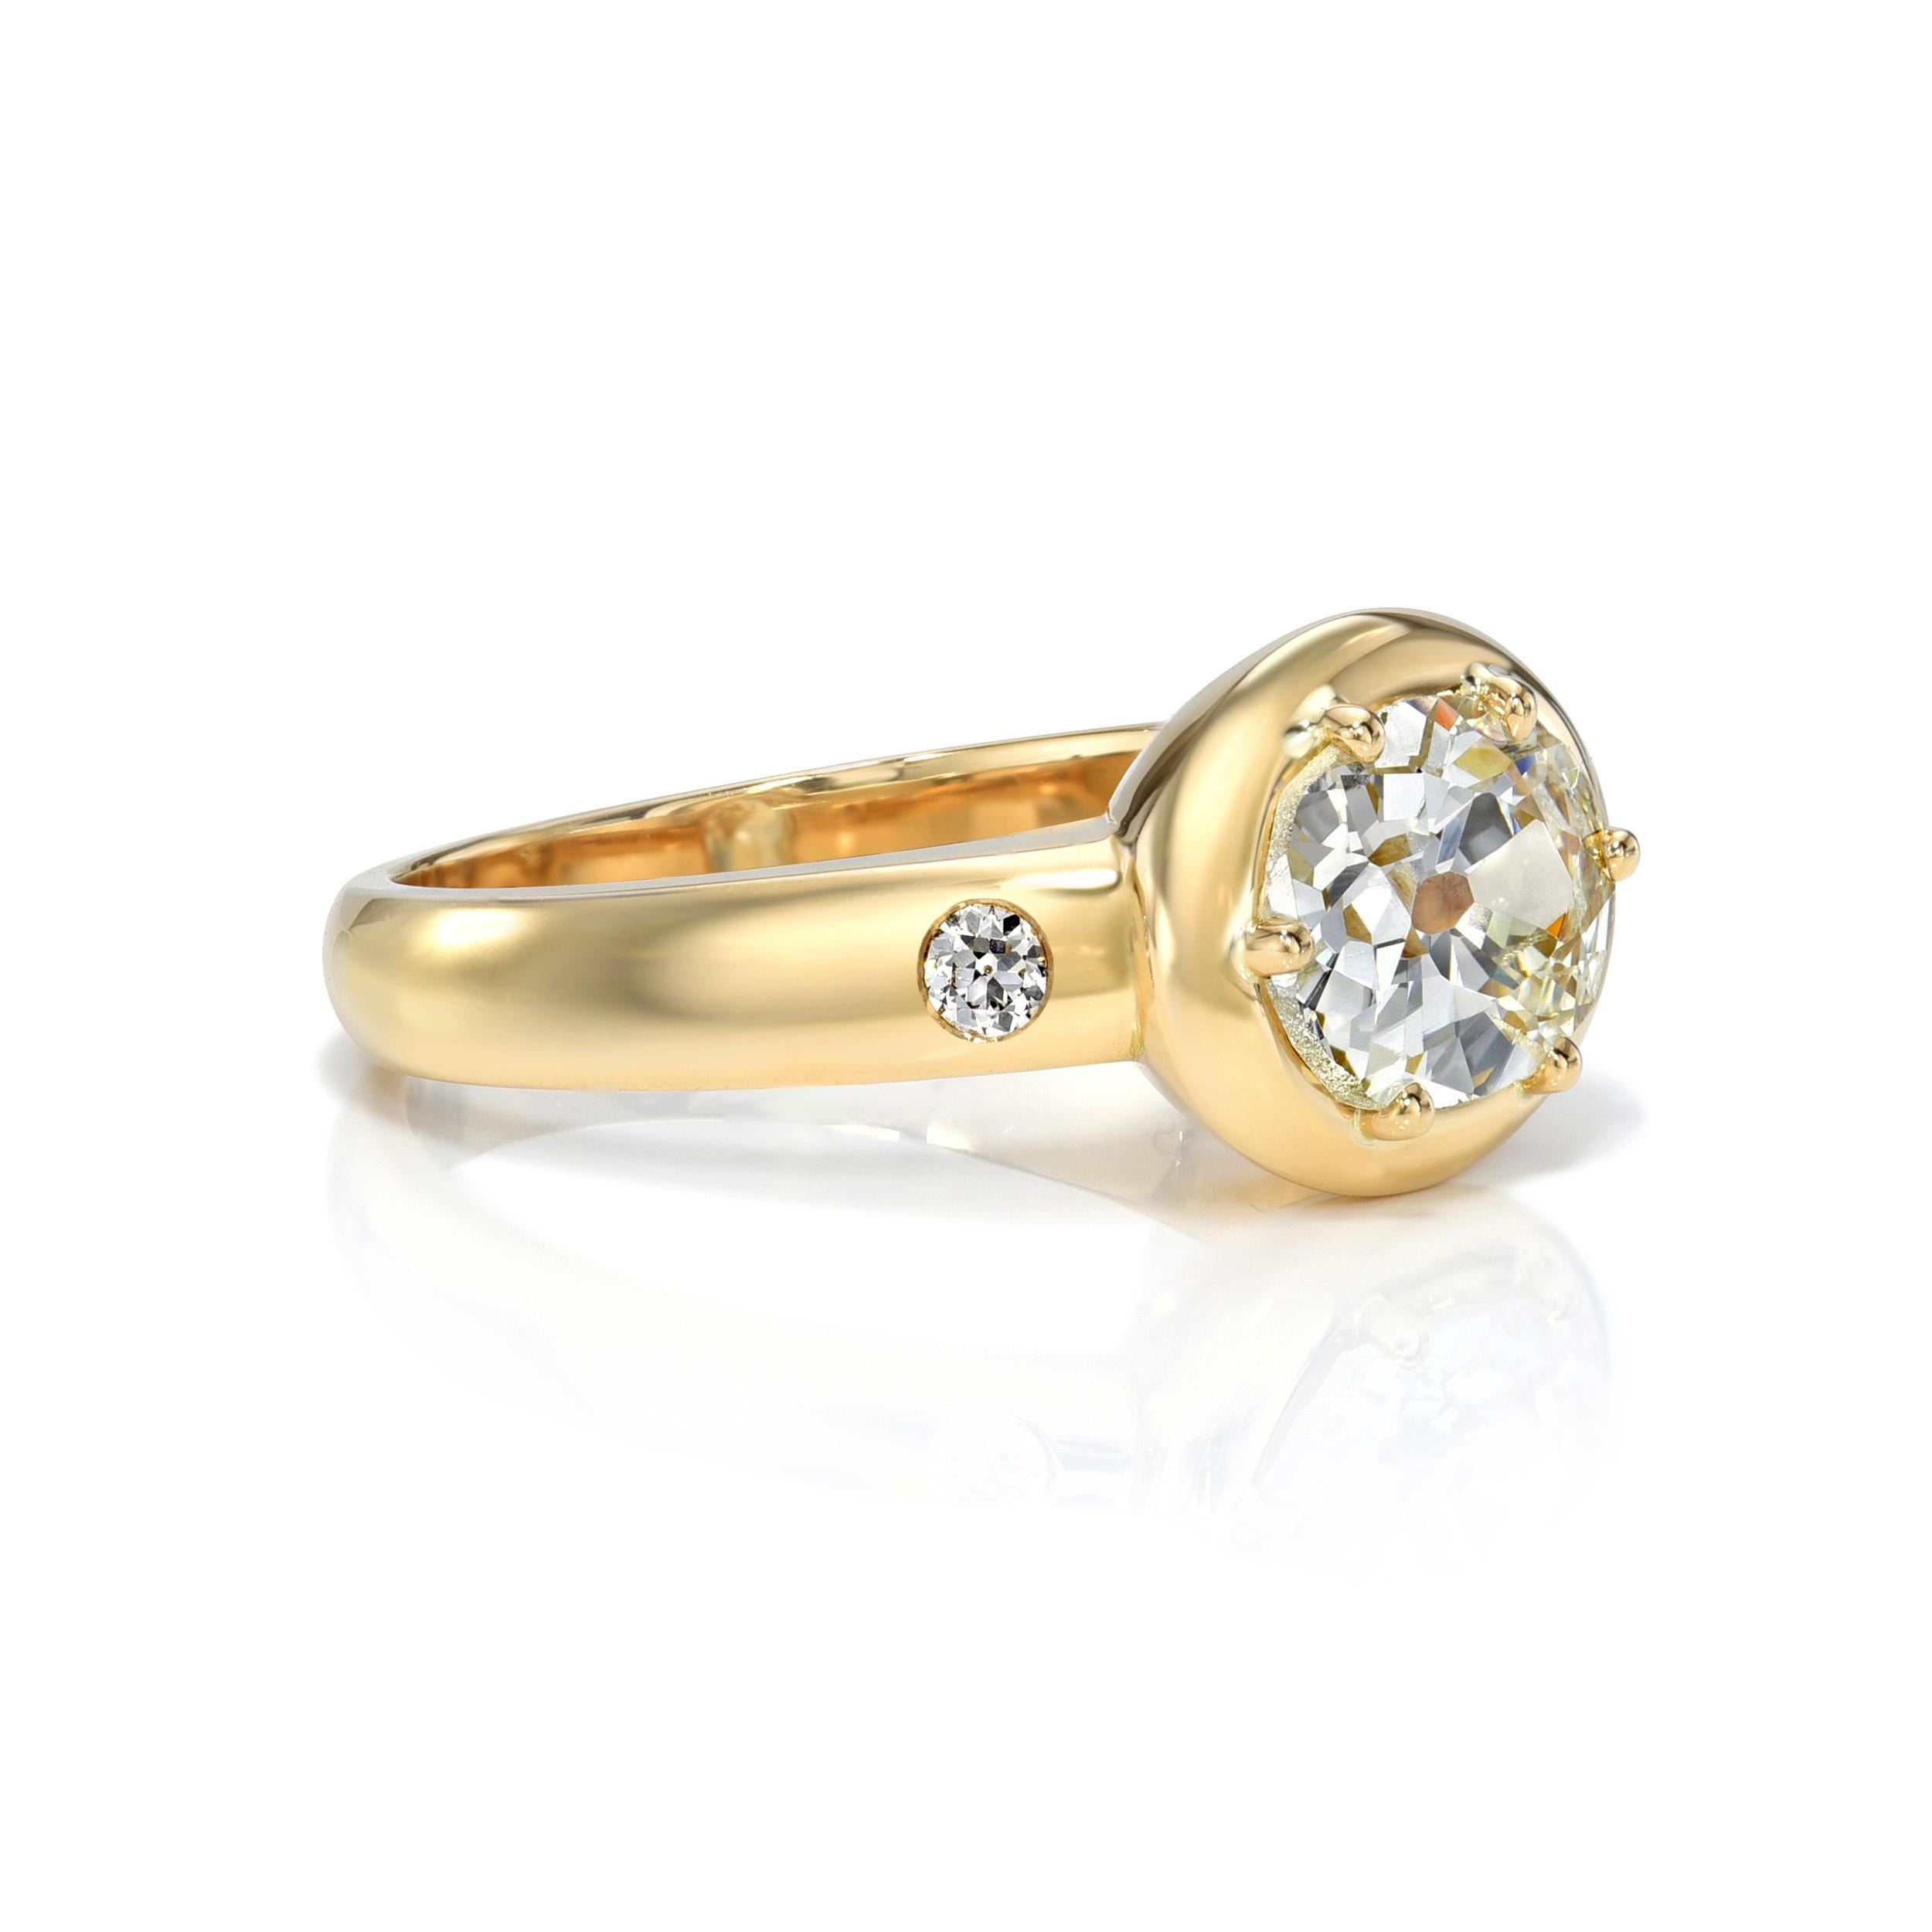 1.55ct L/VS2 GIA certified oval cut diamond with 0.07ctw old European cut accent diamonds prong set in a handcrafted 18K yellow gold mounting.